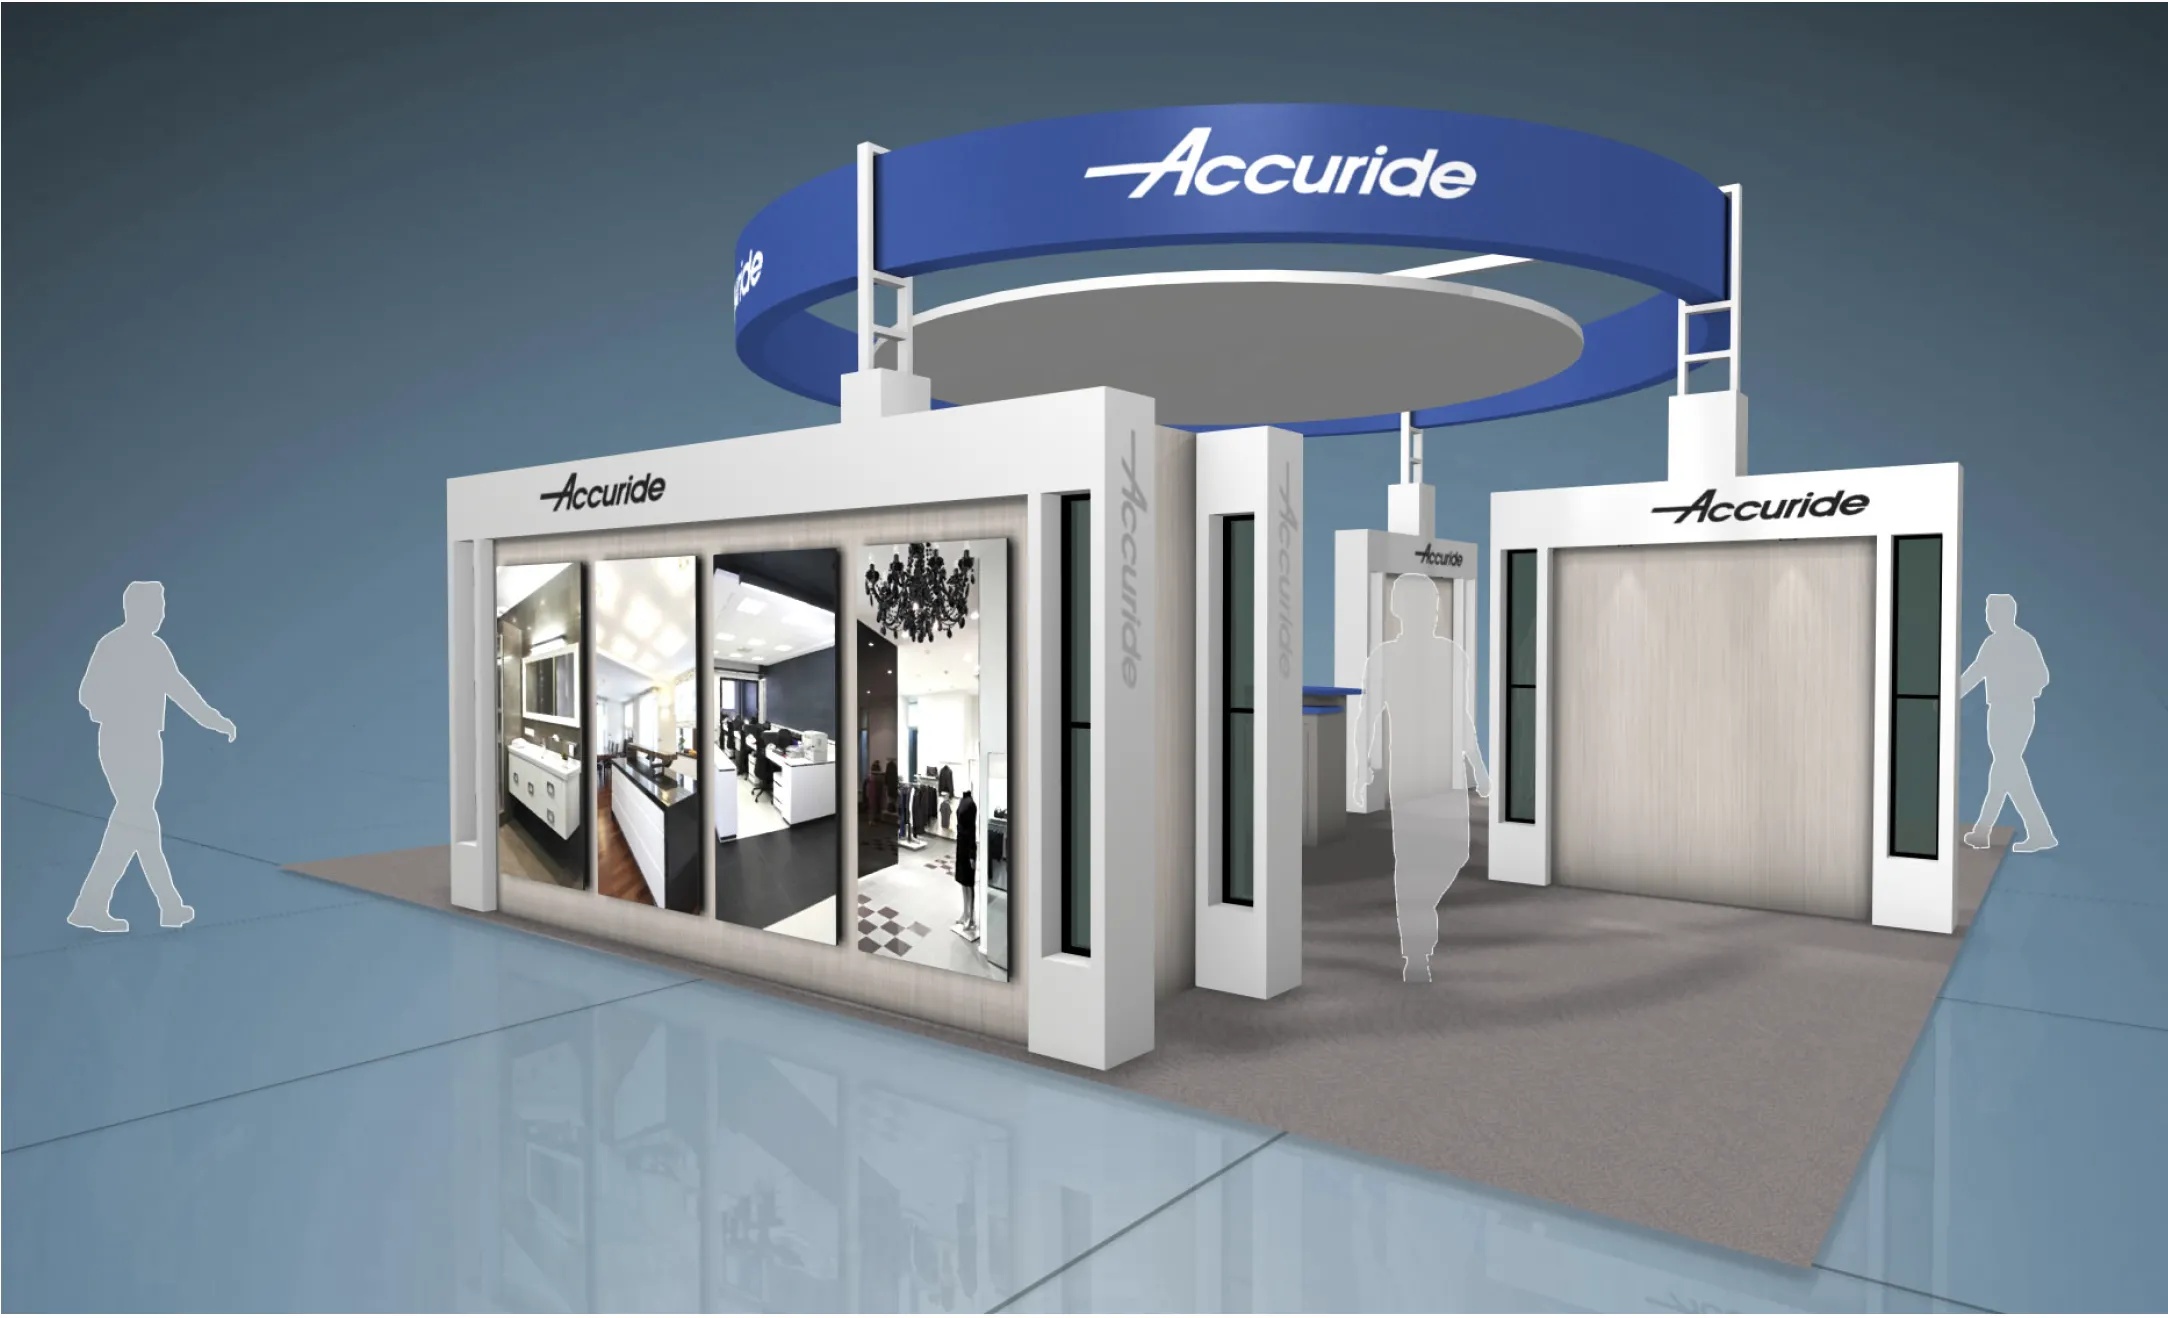 Accuride-AWFS-17-Booth-in-works.png.webp